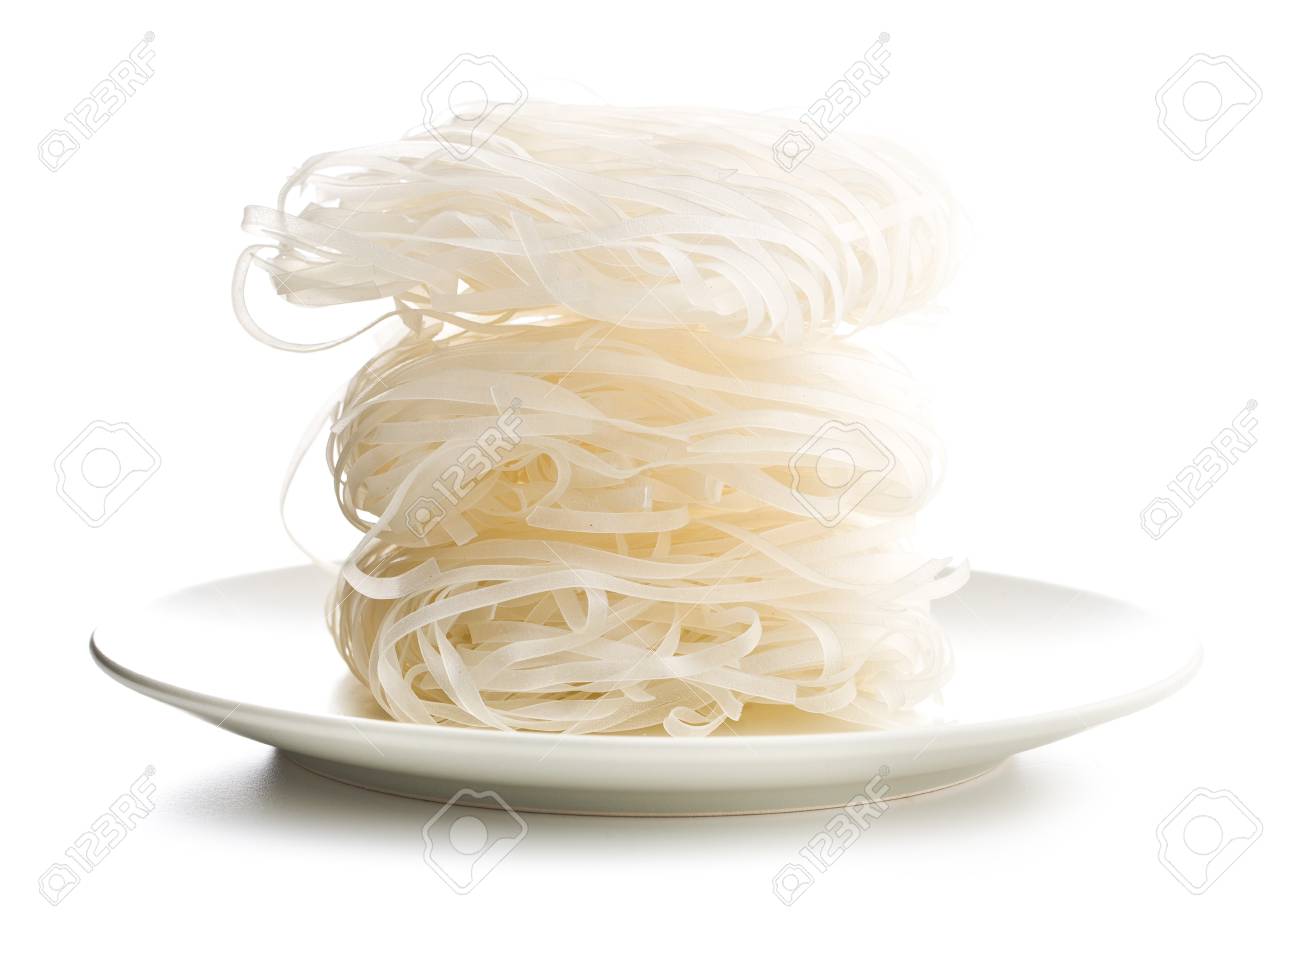 Dried Rice Noodles Isolated On White Background. Stock Photo ...